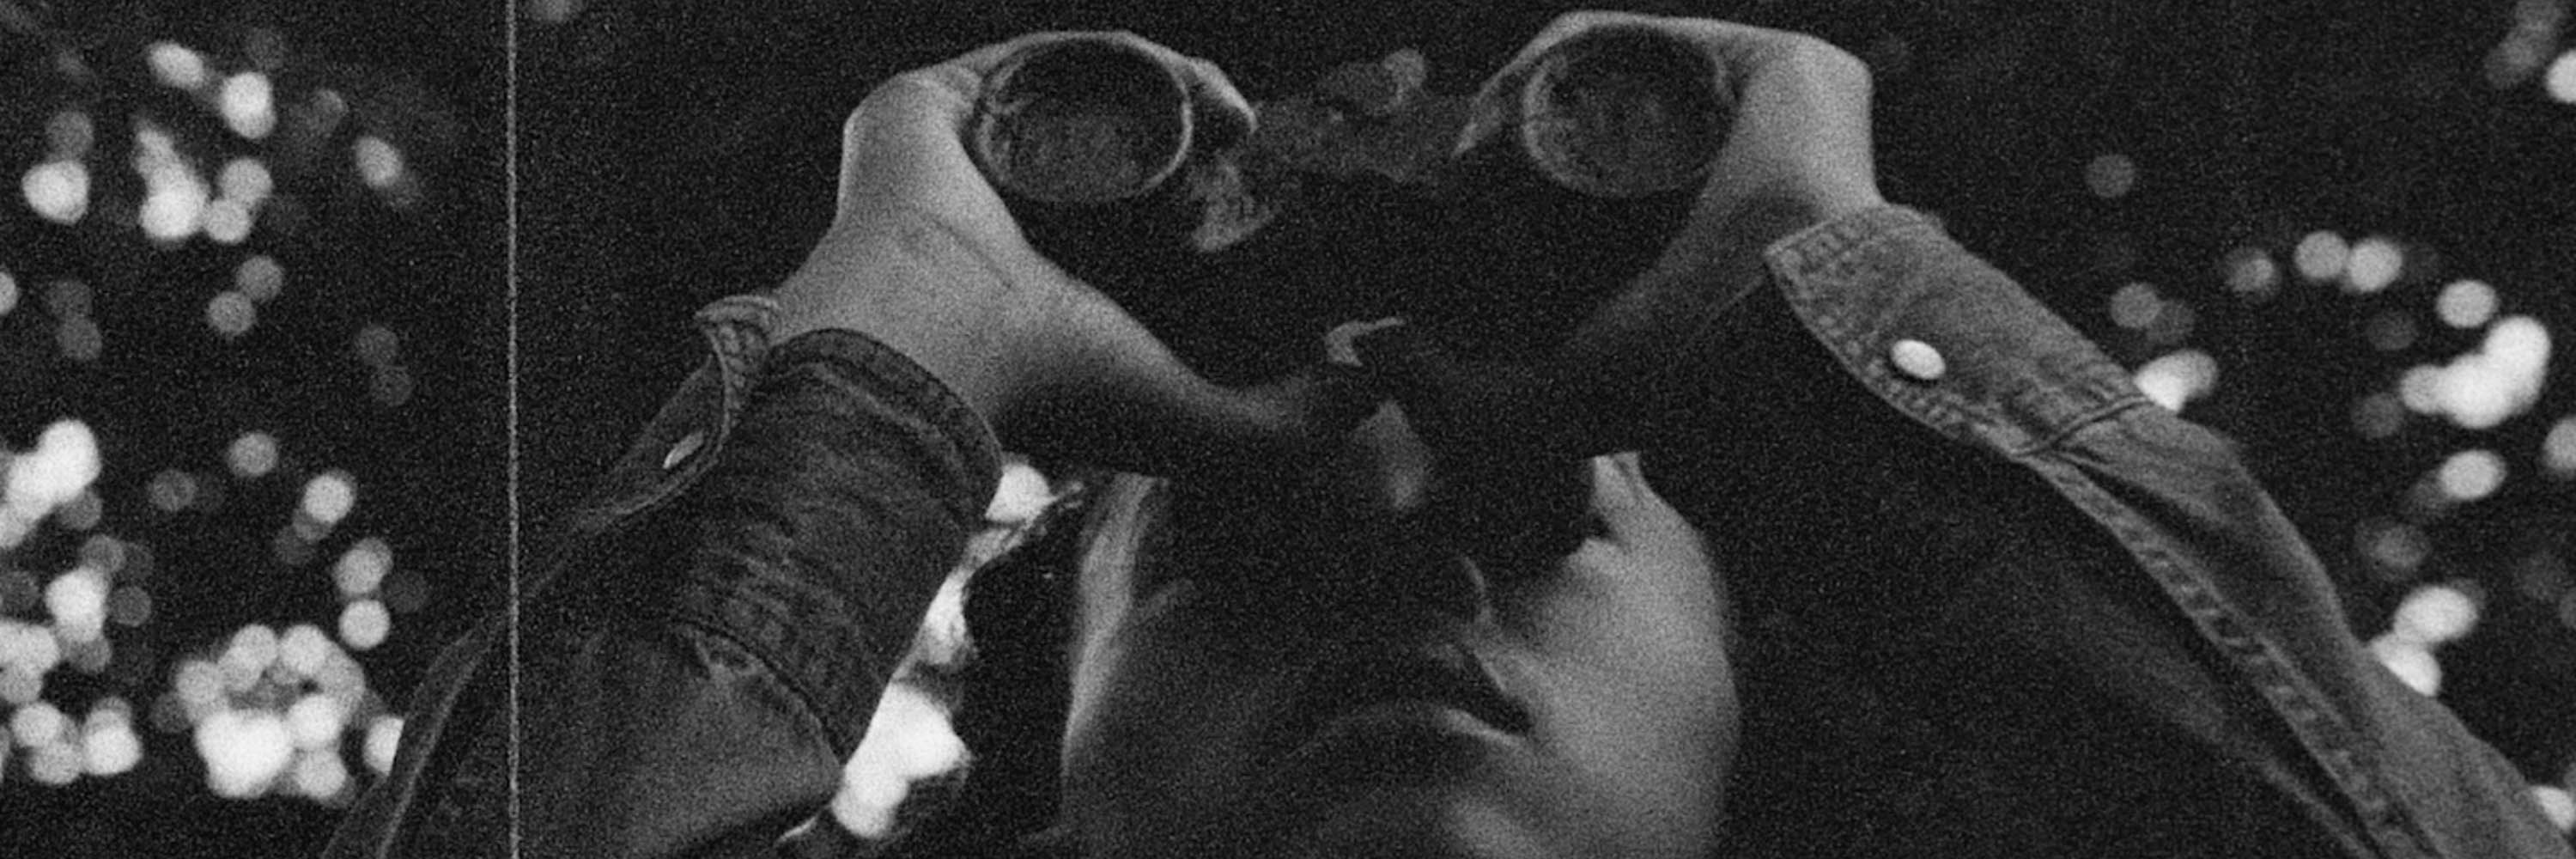 Film still of a person holding binoculars up to their eyes